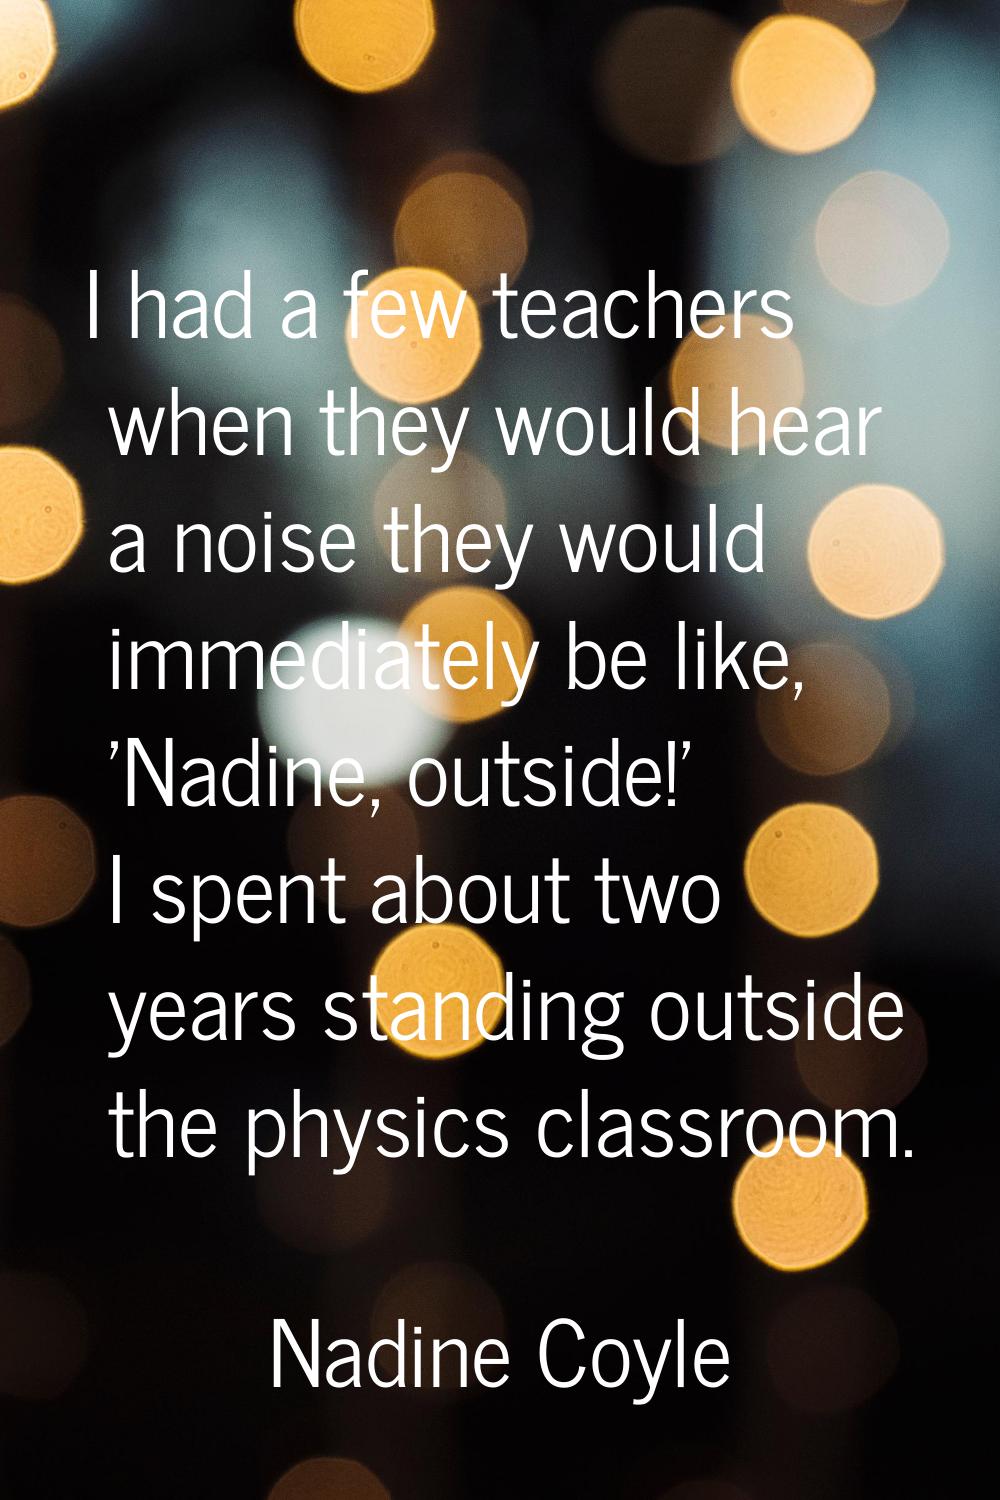 I had a few teachers when they would hear a noise they would immediately be like, 'Nadine, outside!